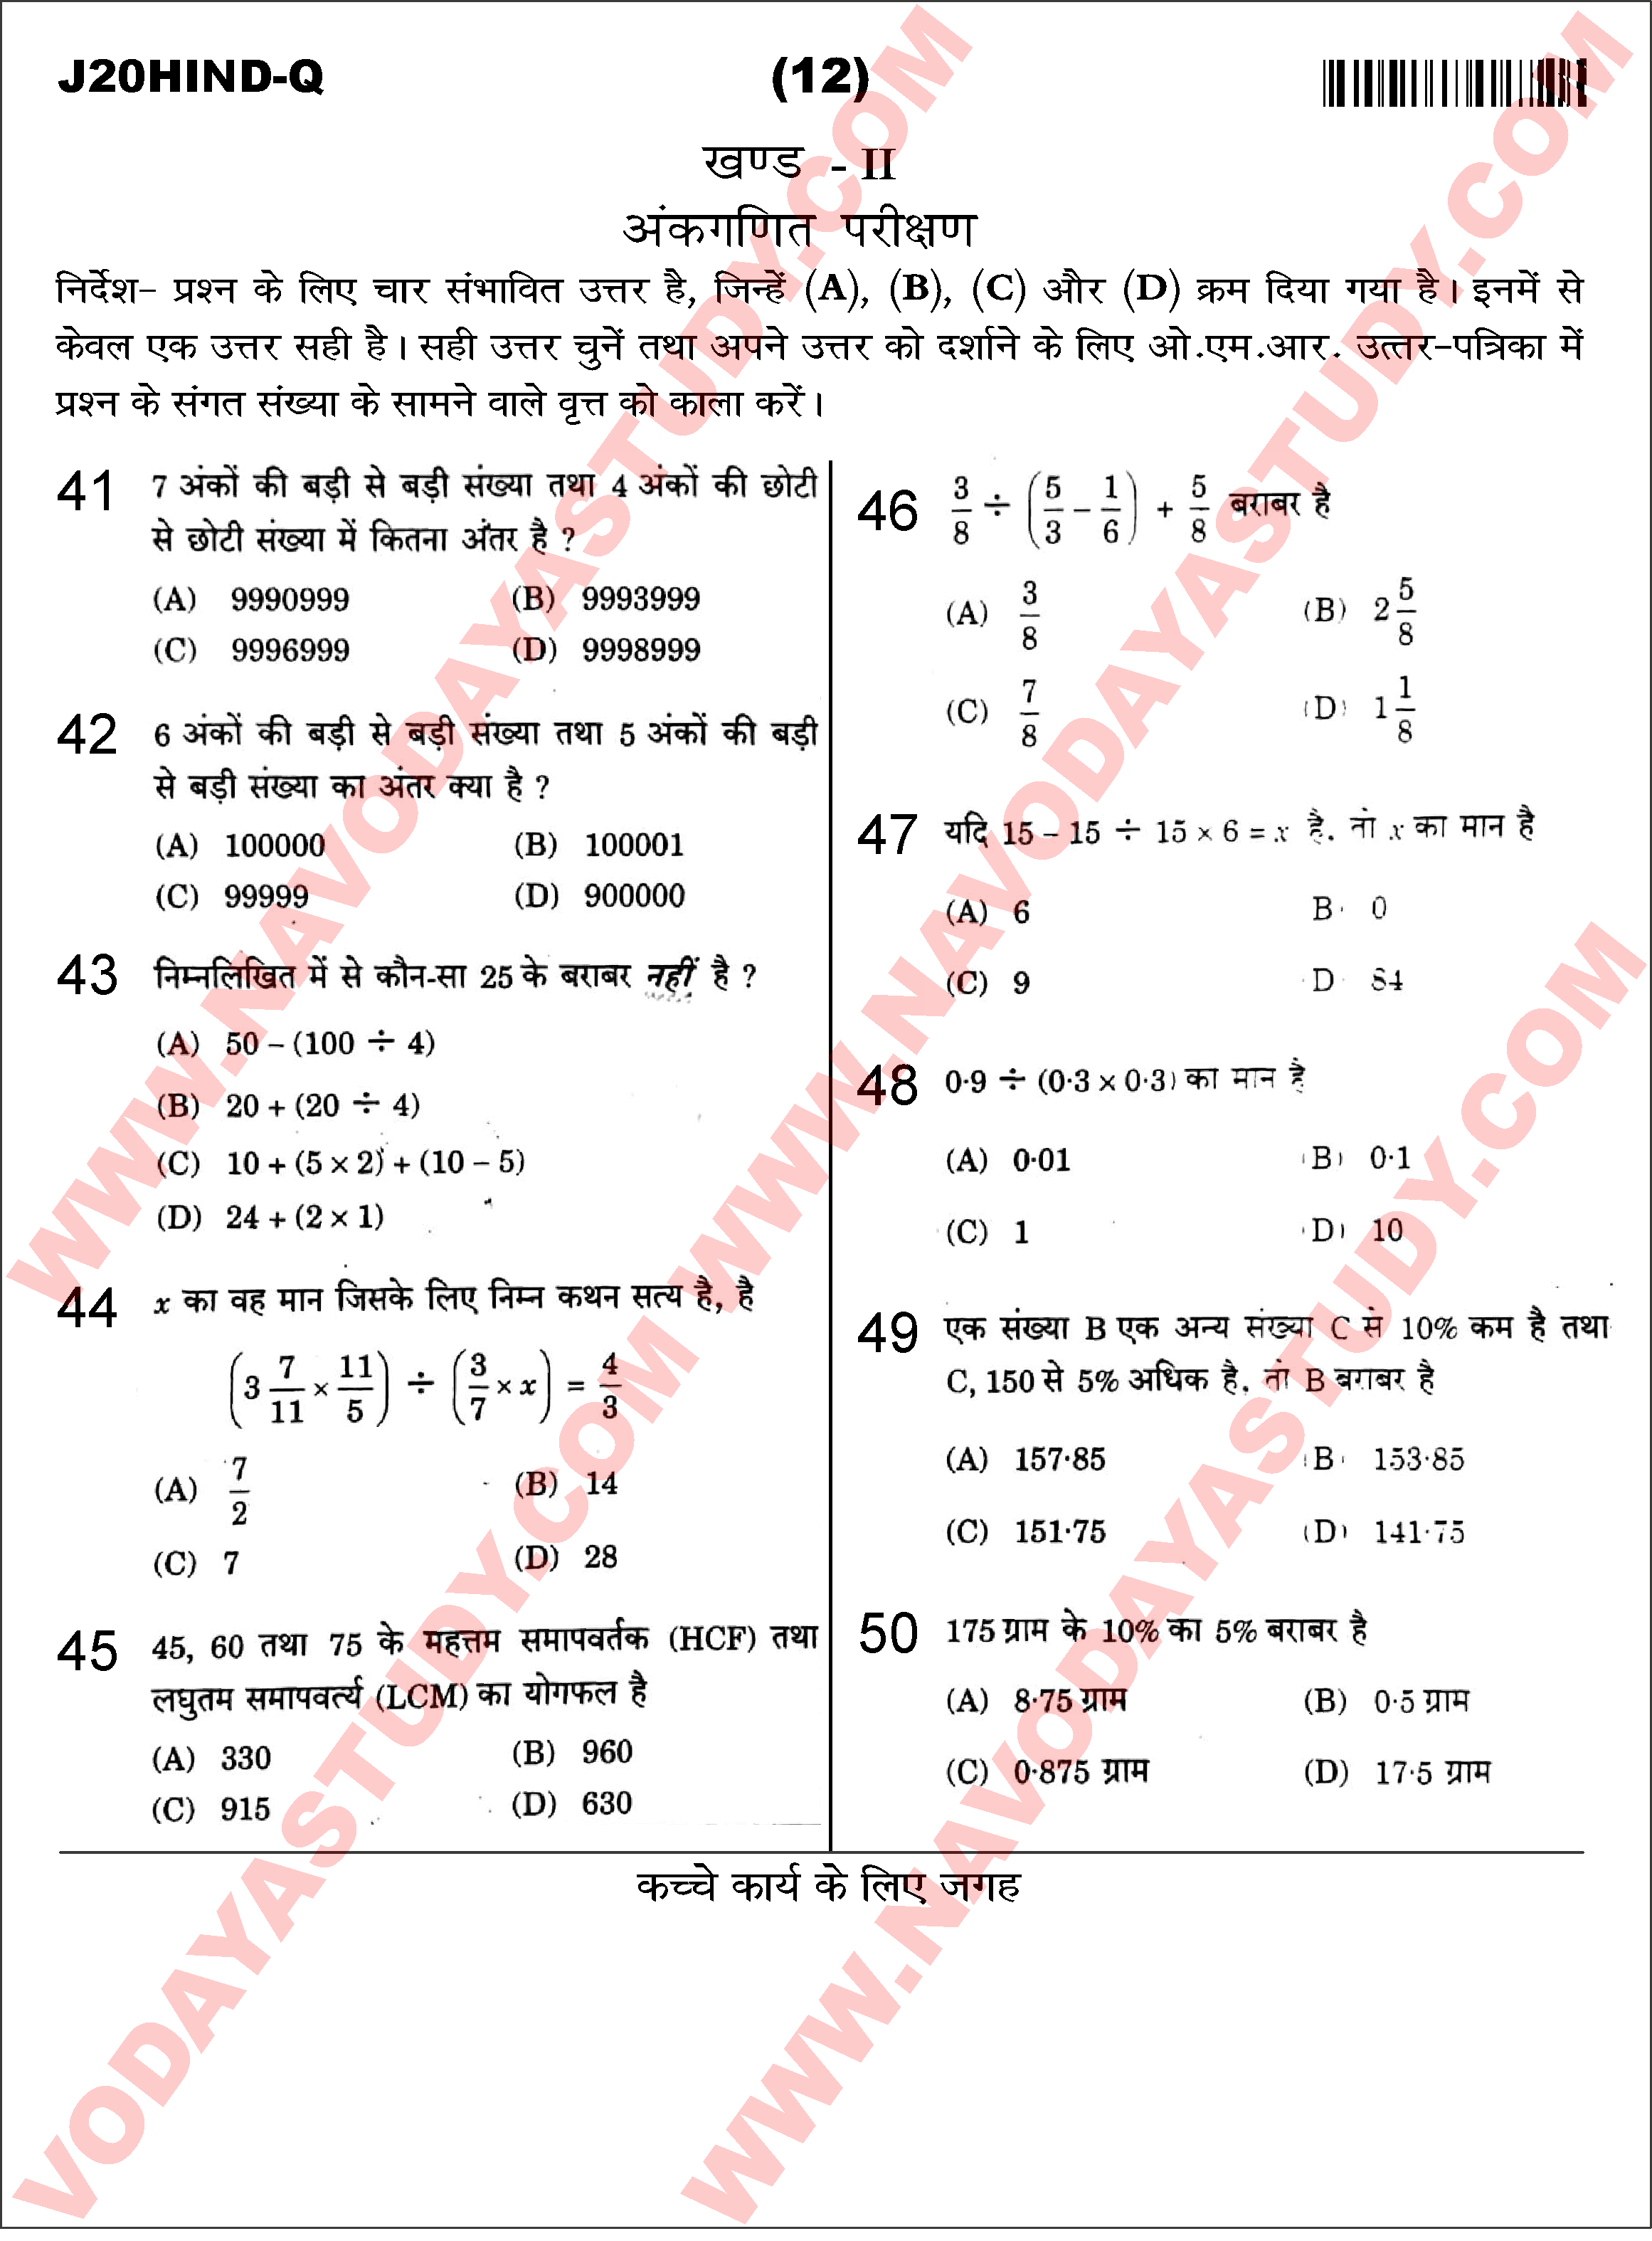 MGNF Answer Key Out Download PDF blogger.com Exam Key